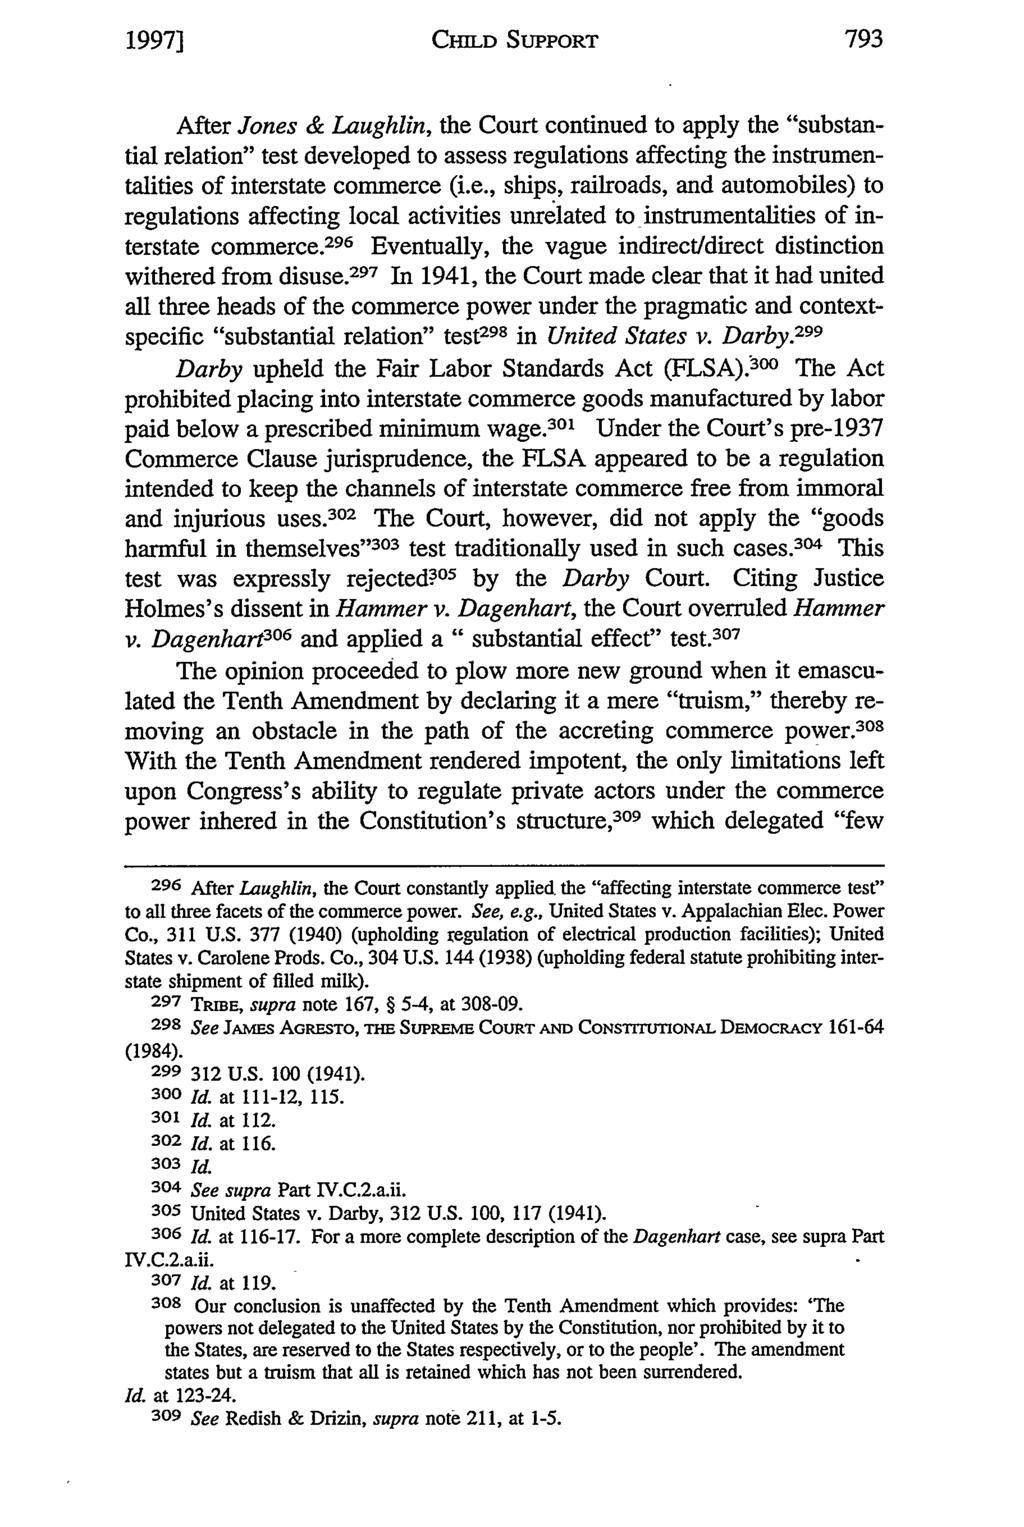 19971 CHILD SUPPORT After Jones & Laughlin, the Court continued to apply the "substantial relation" test developed to assess regulations affecting the instrumentalities of interstate commerce (i.e., ships, railroads, and automobiles) to regulations affecting local activities unrelated to instrumentalities of interstate commerce.